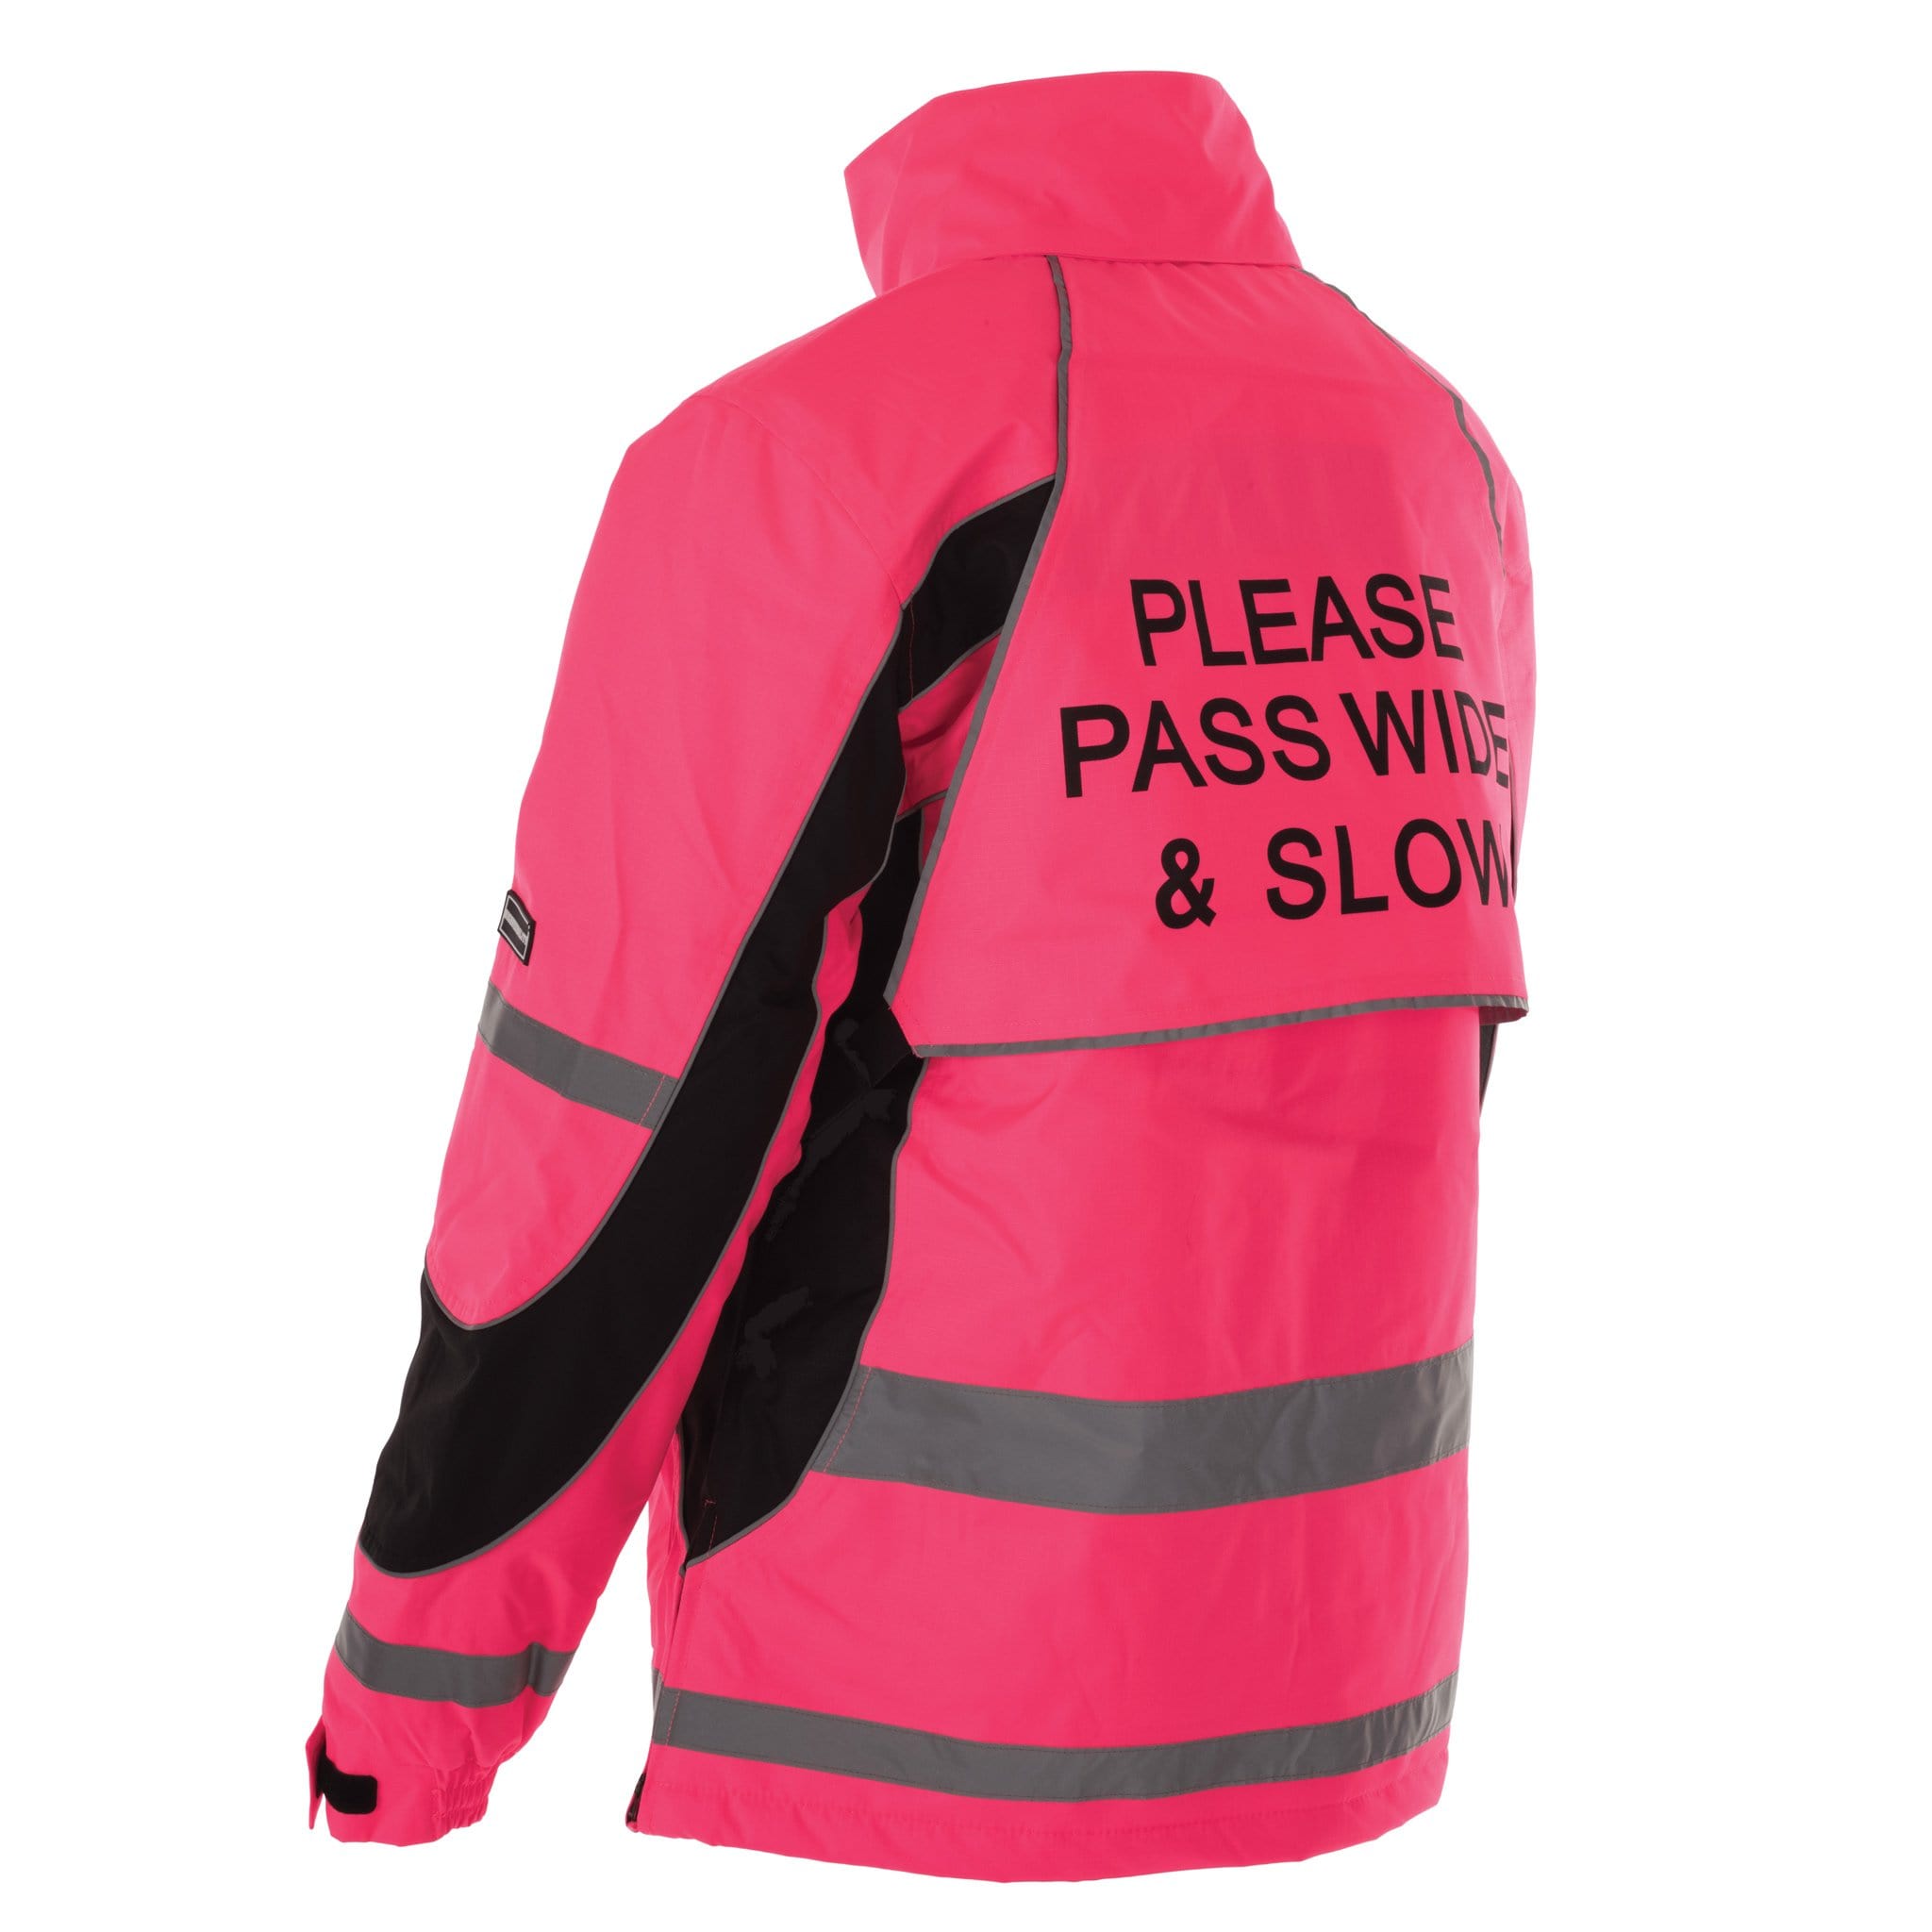 Equisafety Inverno Jacket Pink Rear View NEWIJ02